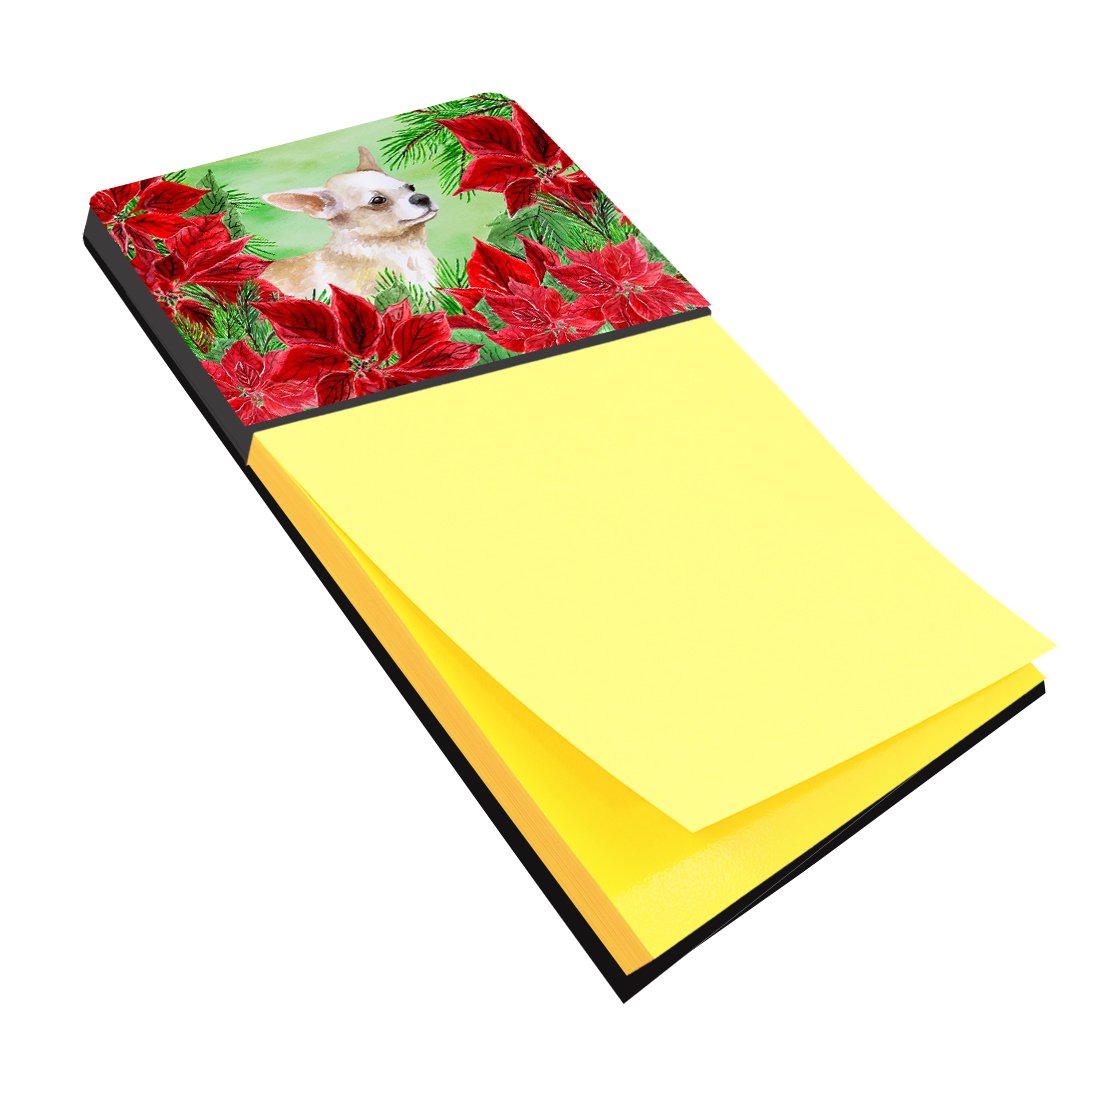 Chihuahua Leg up Poinsettas Sticky Note Holder CK1345SN by Caroline's Treasures